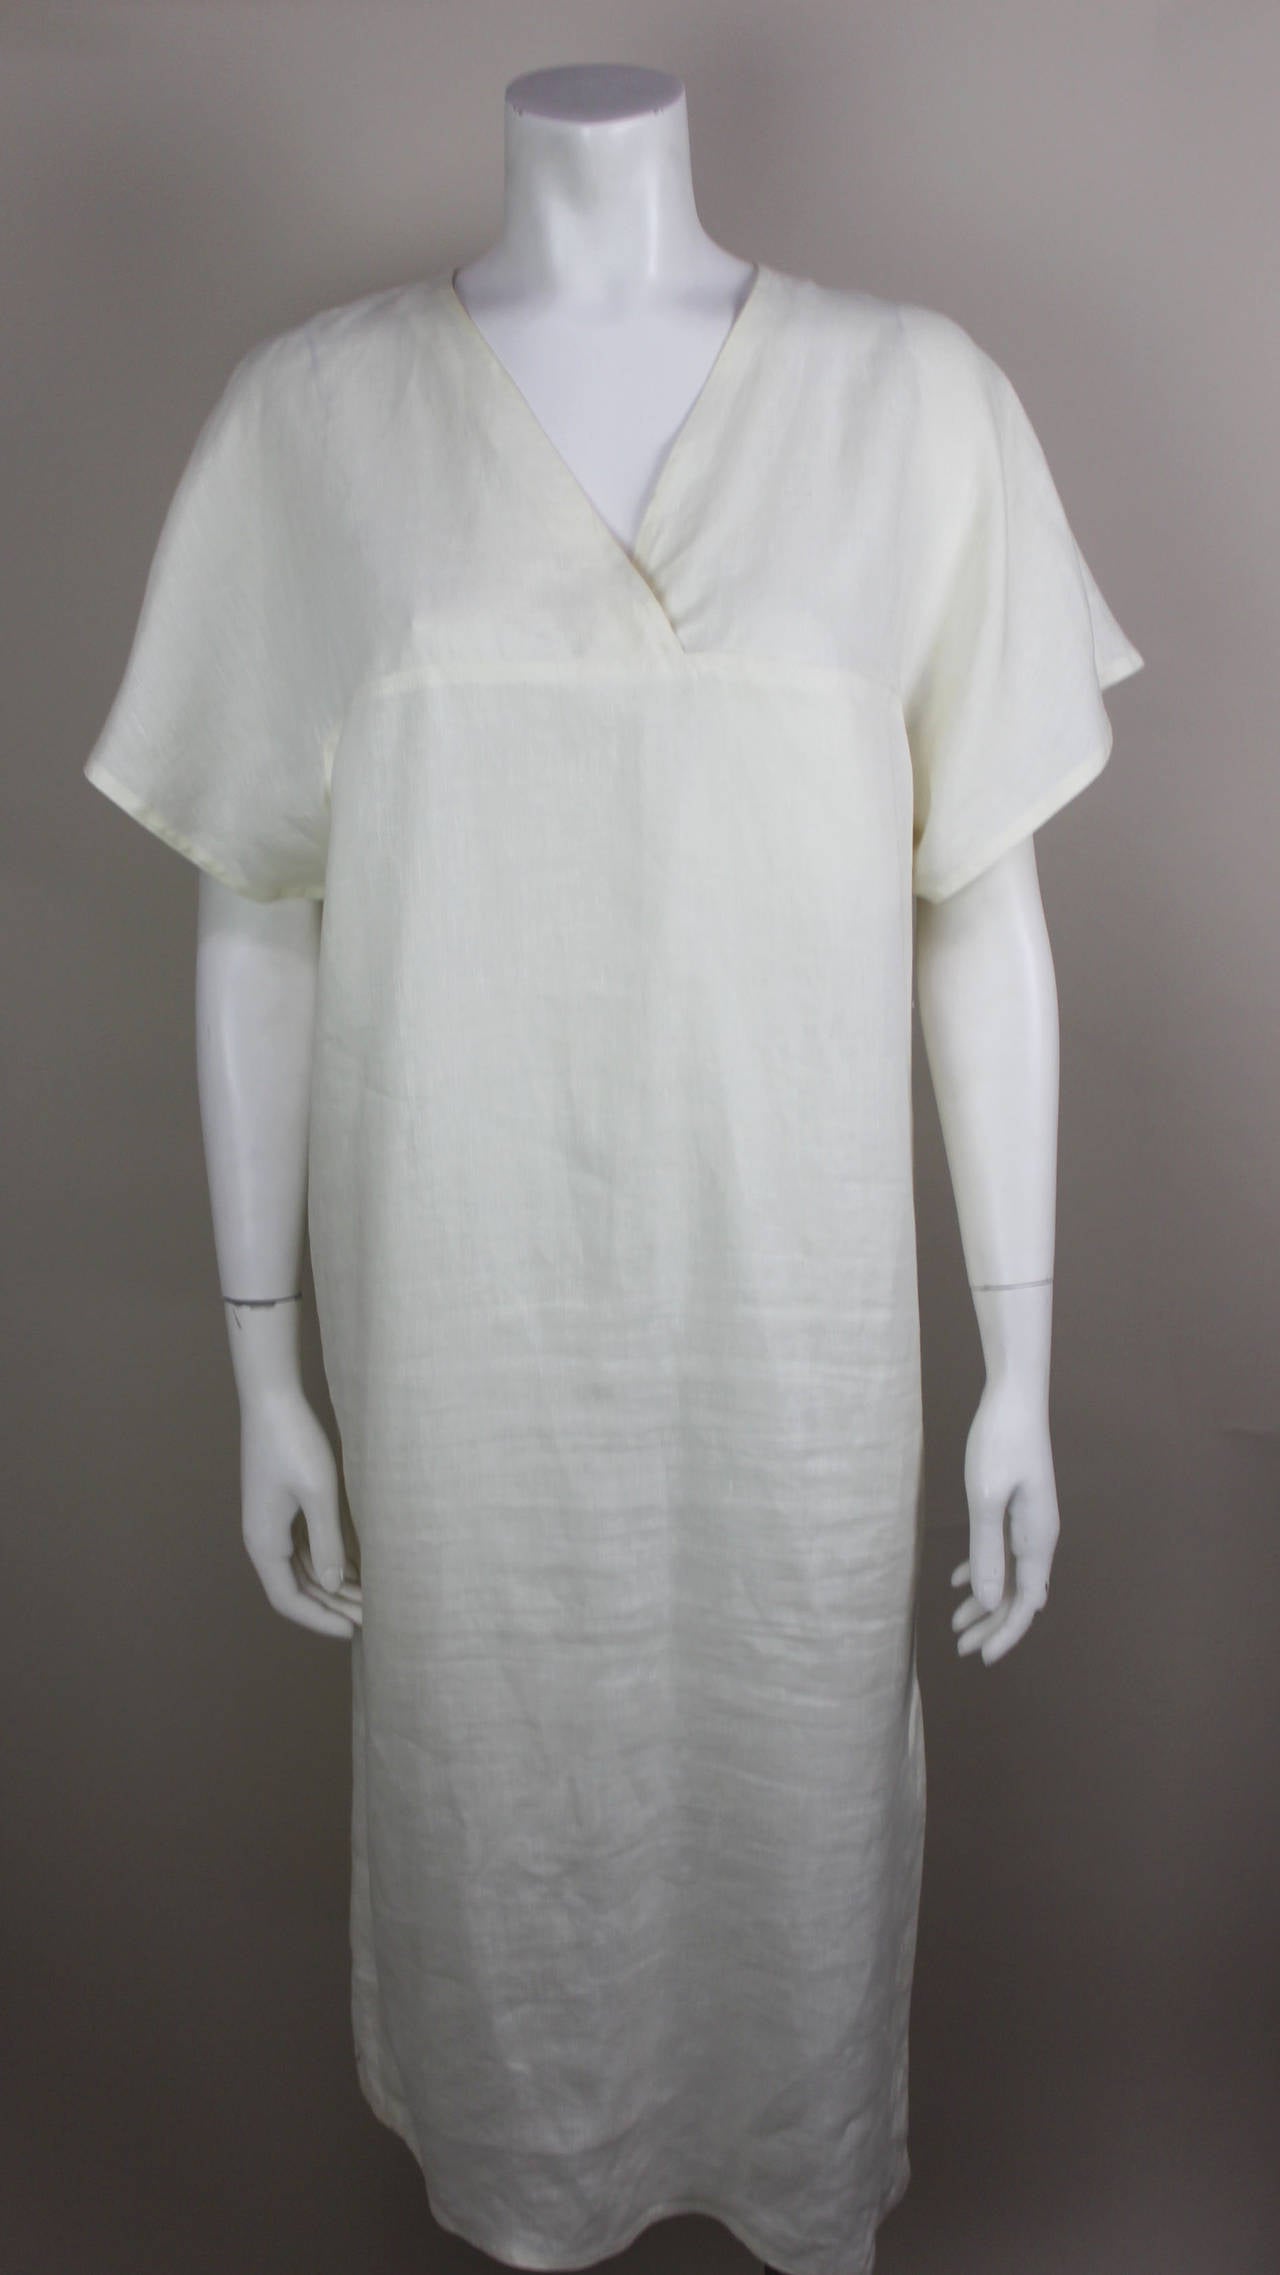 This creme linen dress is beautiful in its simplicity. It has no adornment other than three mother of pearl buttons at the bottom on the side seam. The sleeves are in a short kimono style. It's the perfect summer dress!